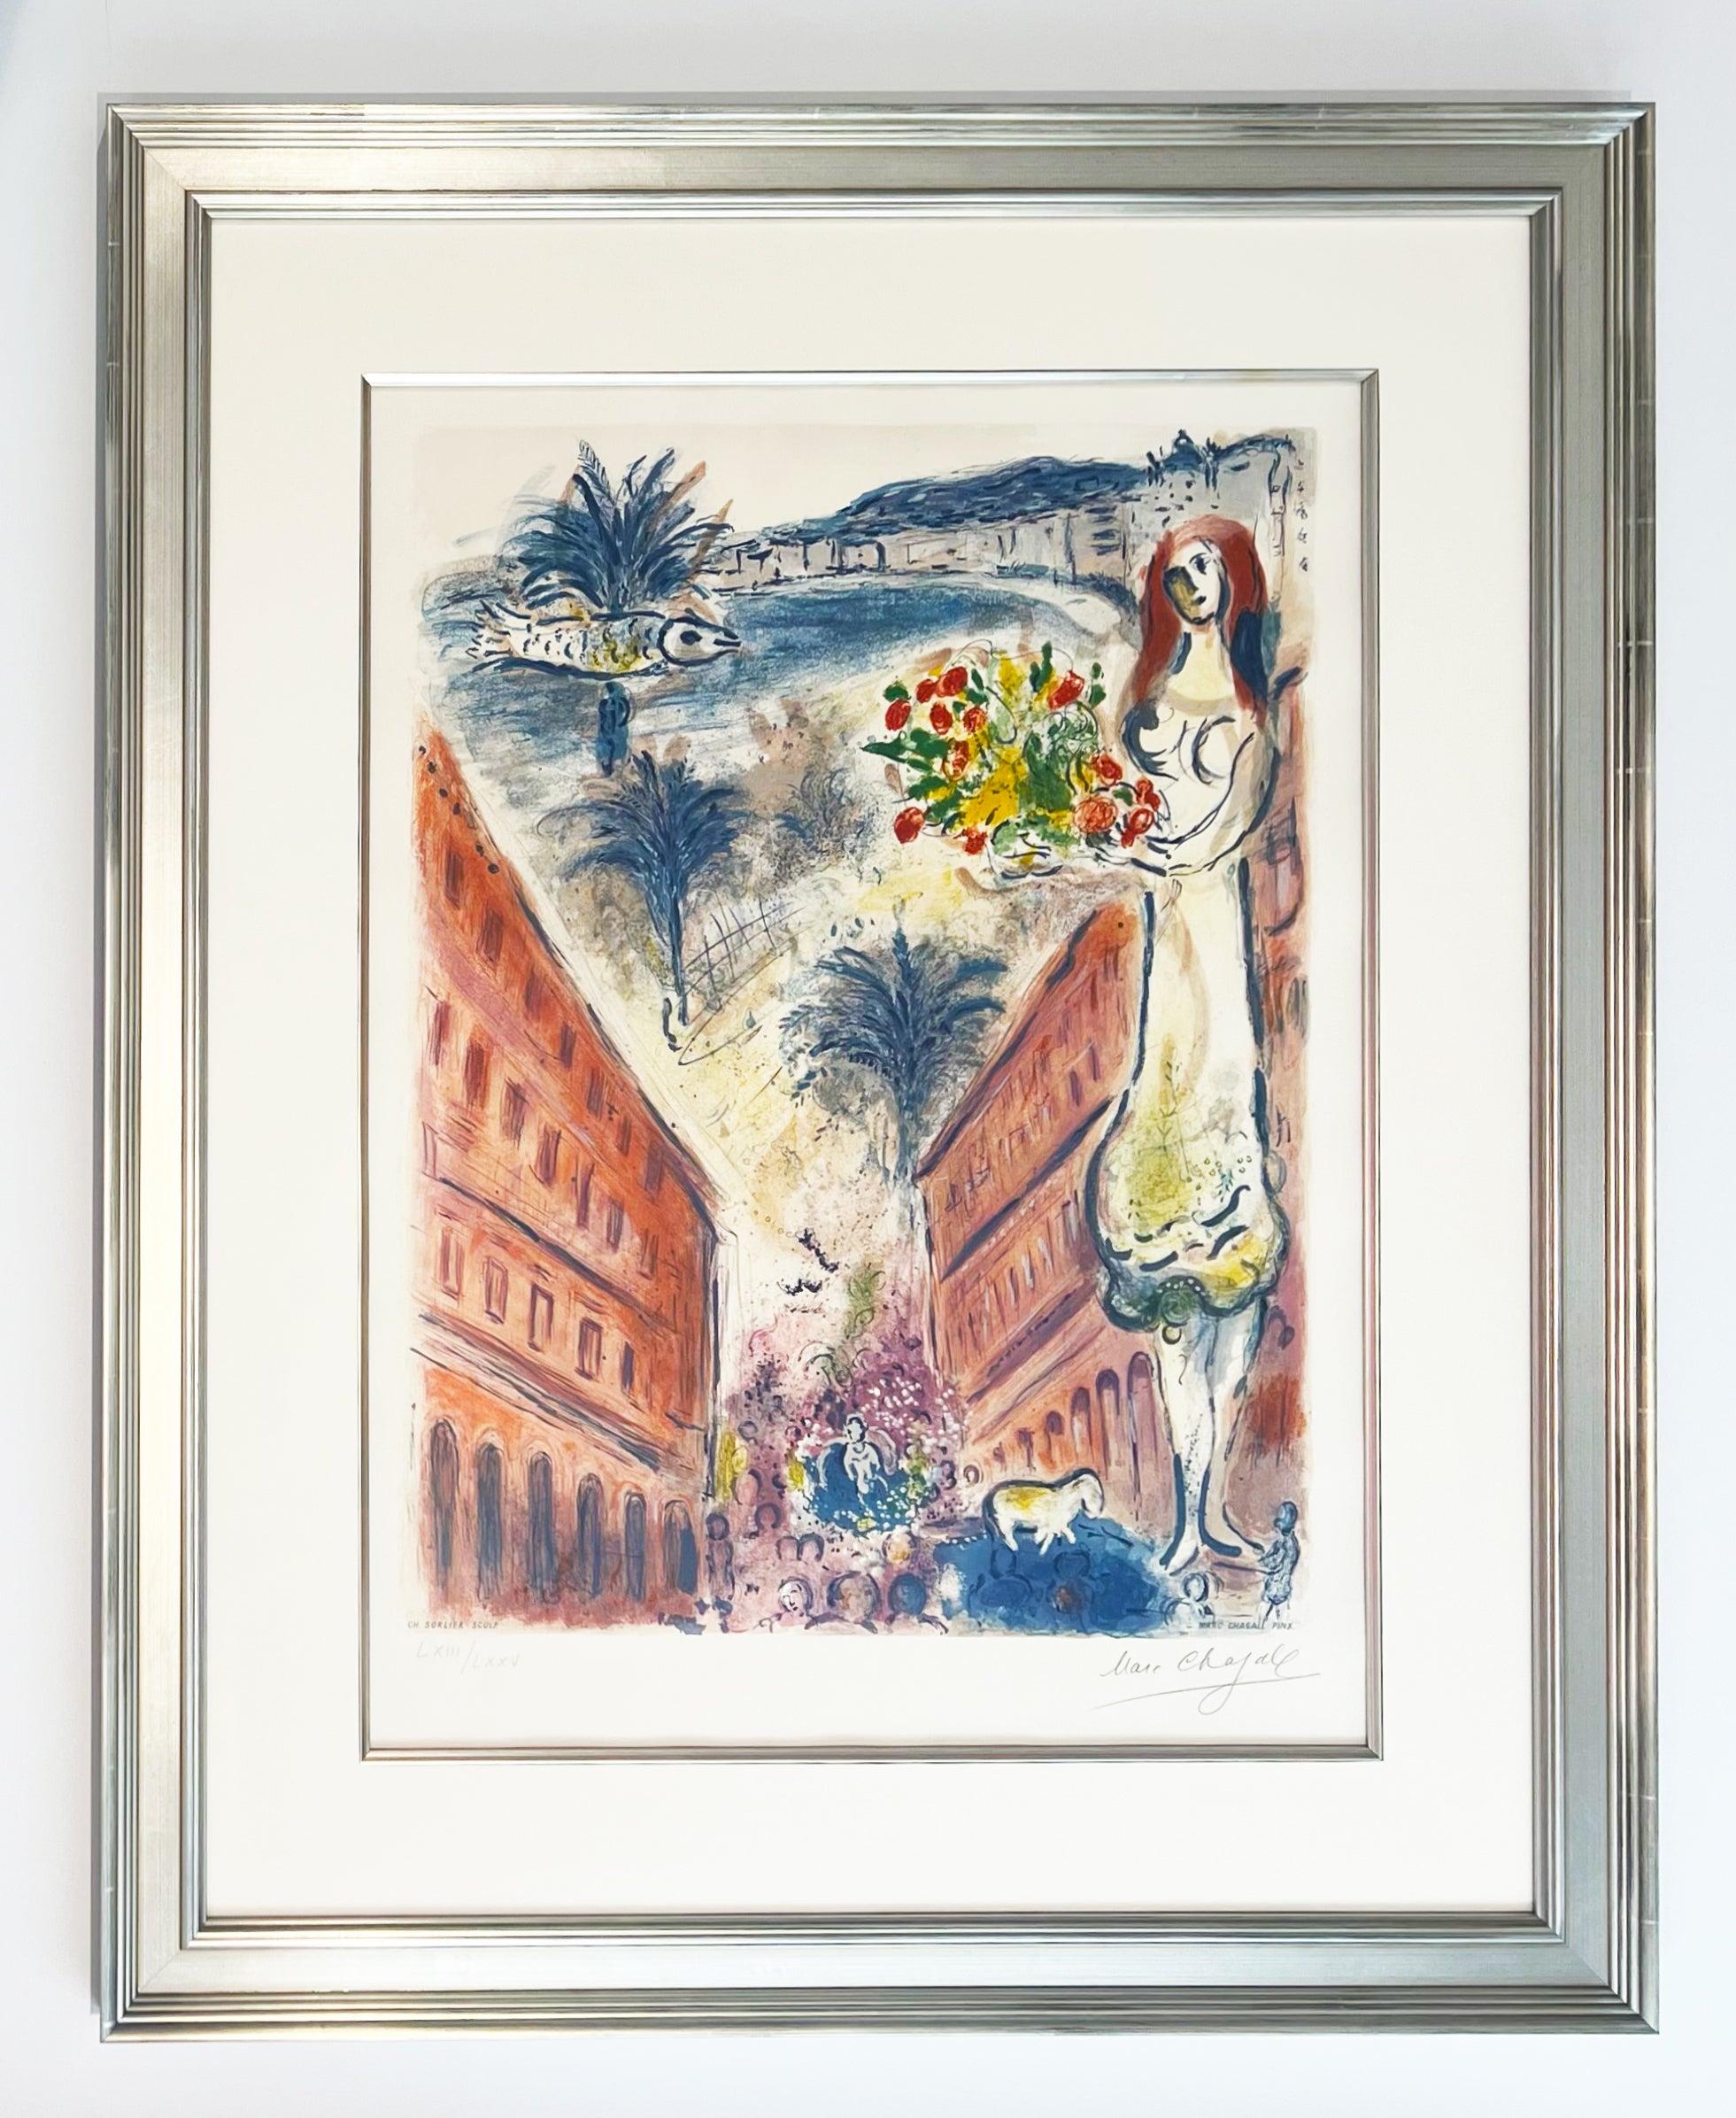 Avenue De La Victoire at Nice, from Nice and the Cote d'Azur - Print by (after) Marc Chagall